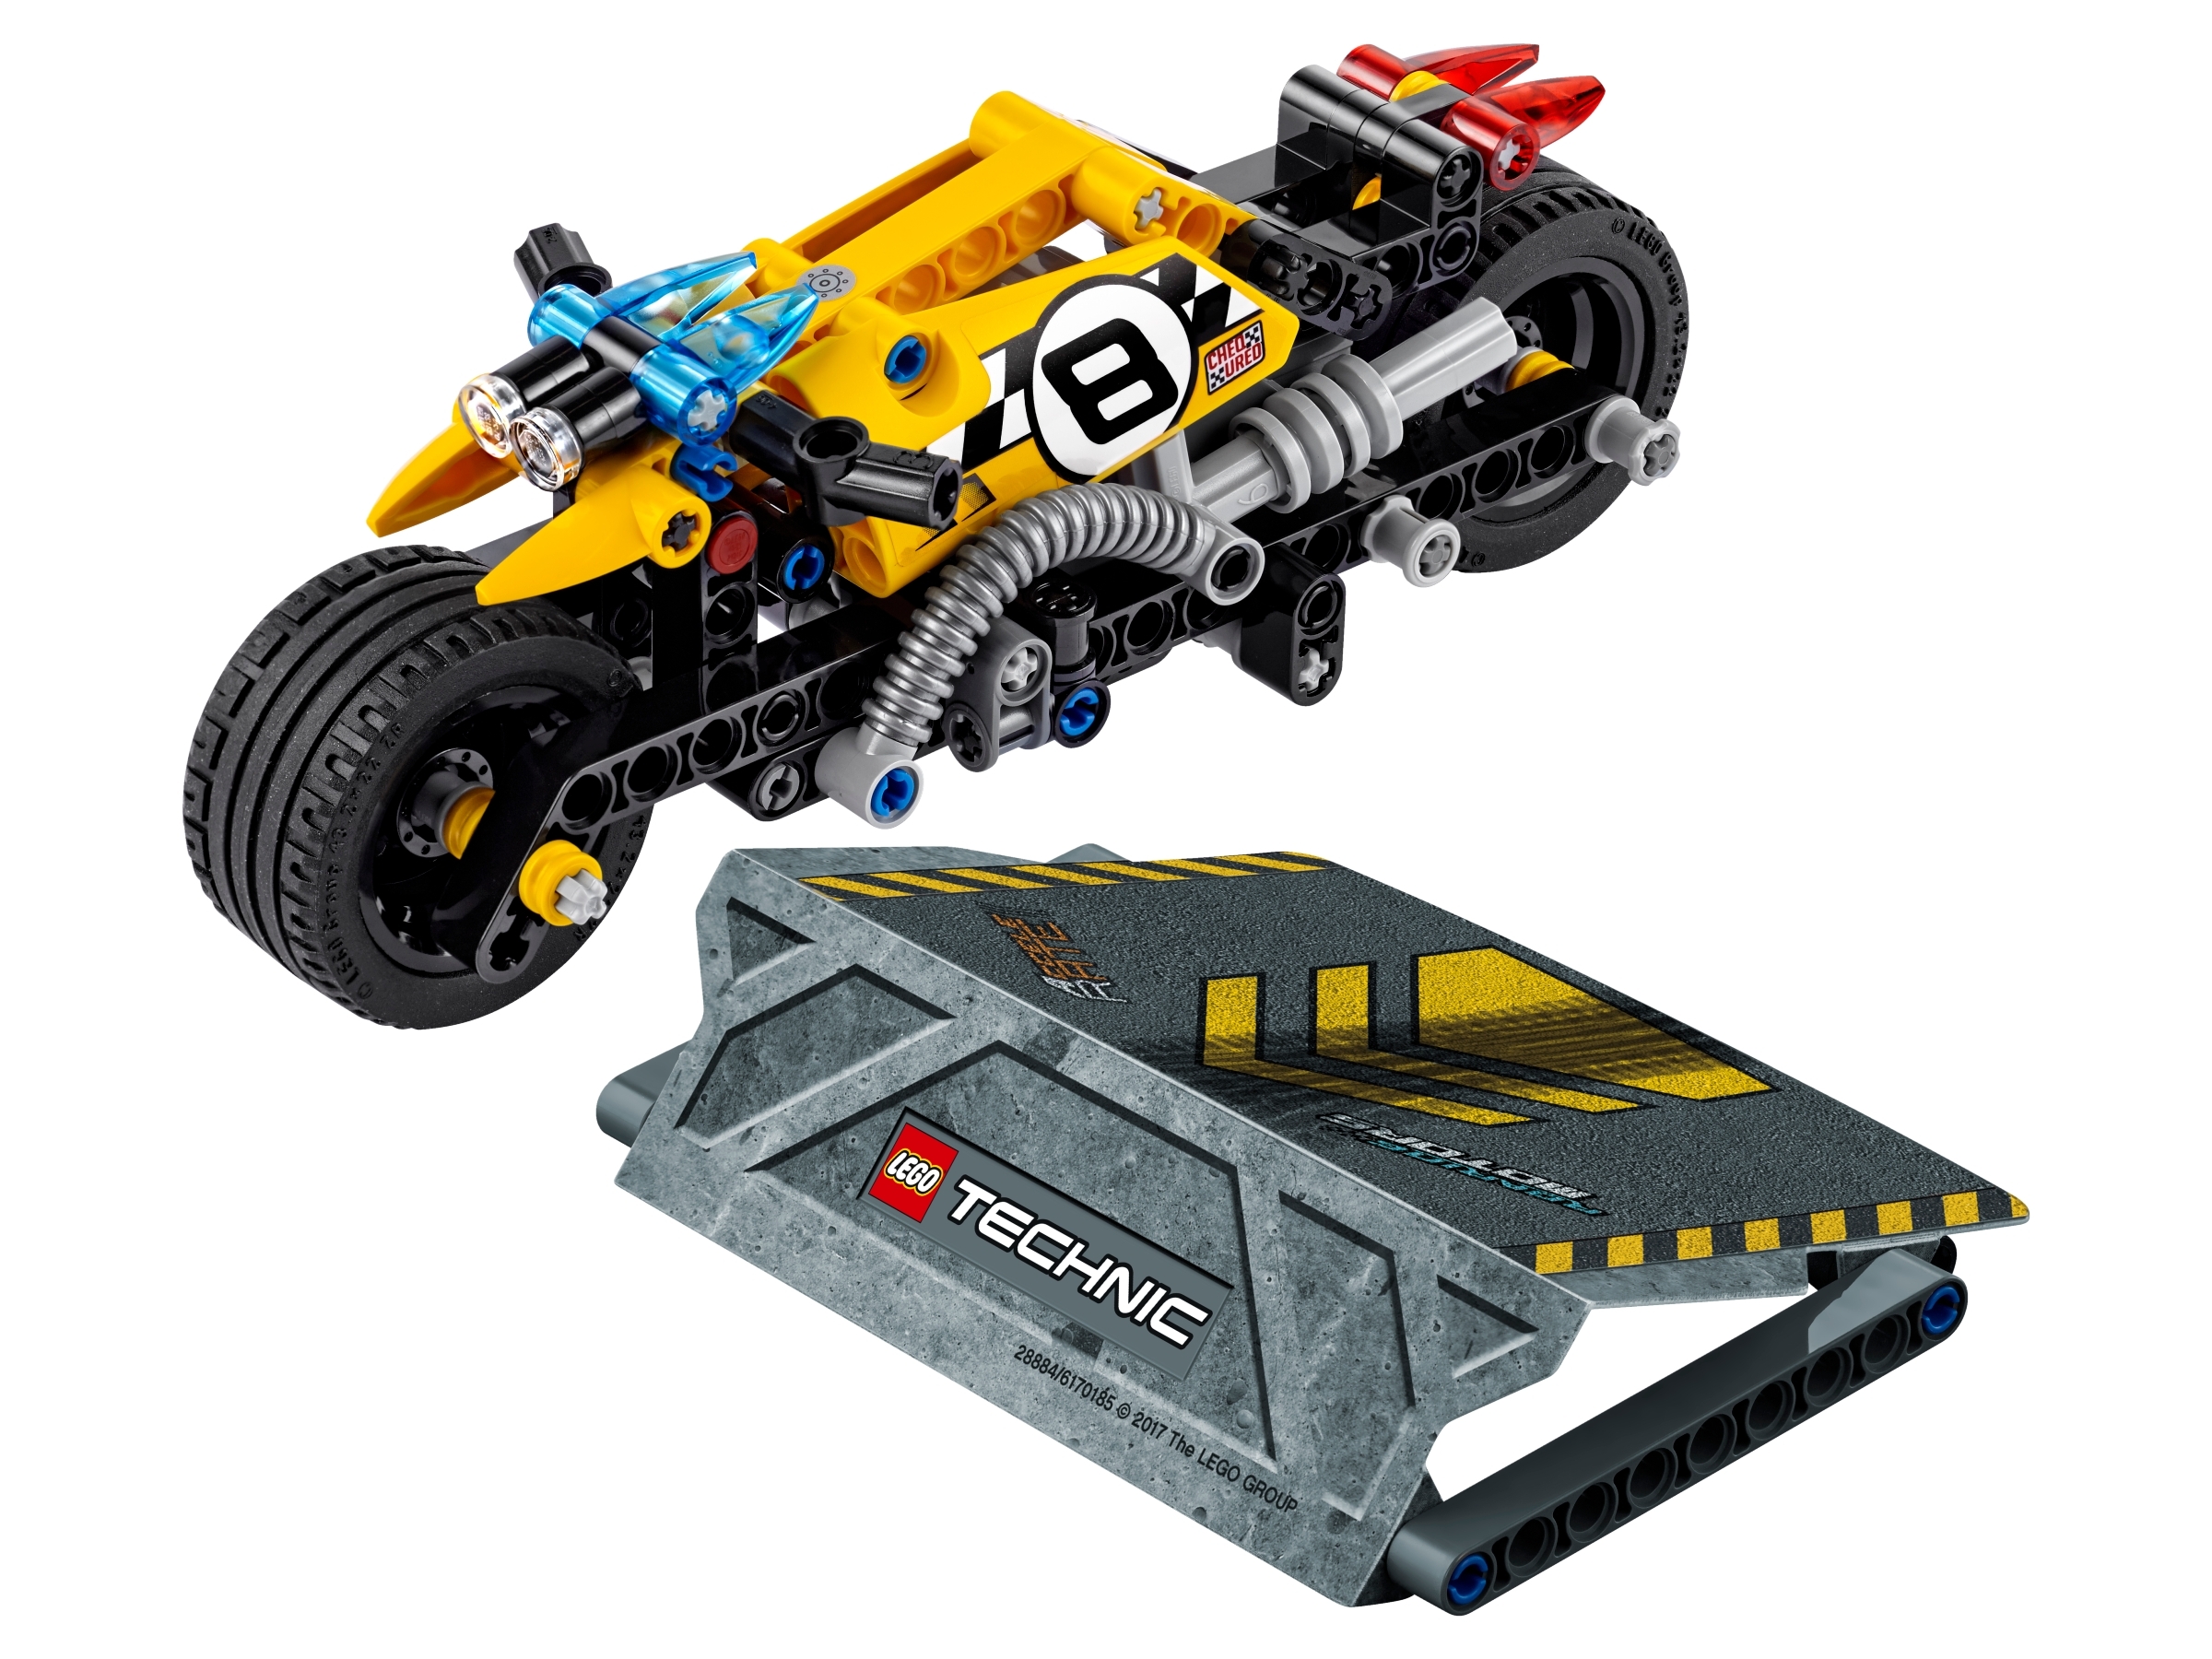 Stunt Bike 42058 | Technic™ | Buy online at the Official LEGO® Shop US